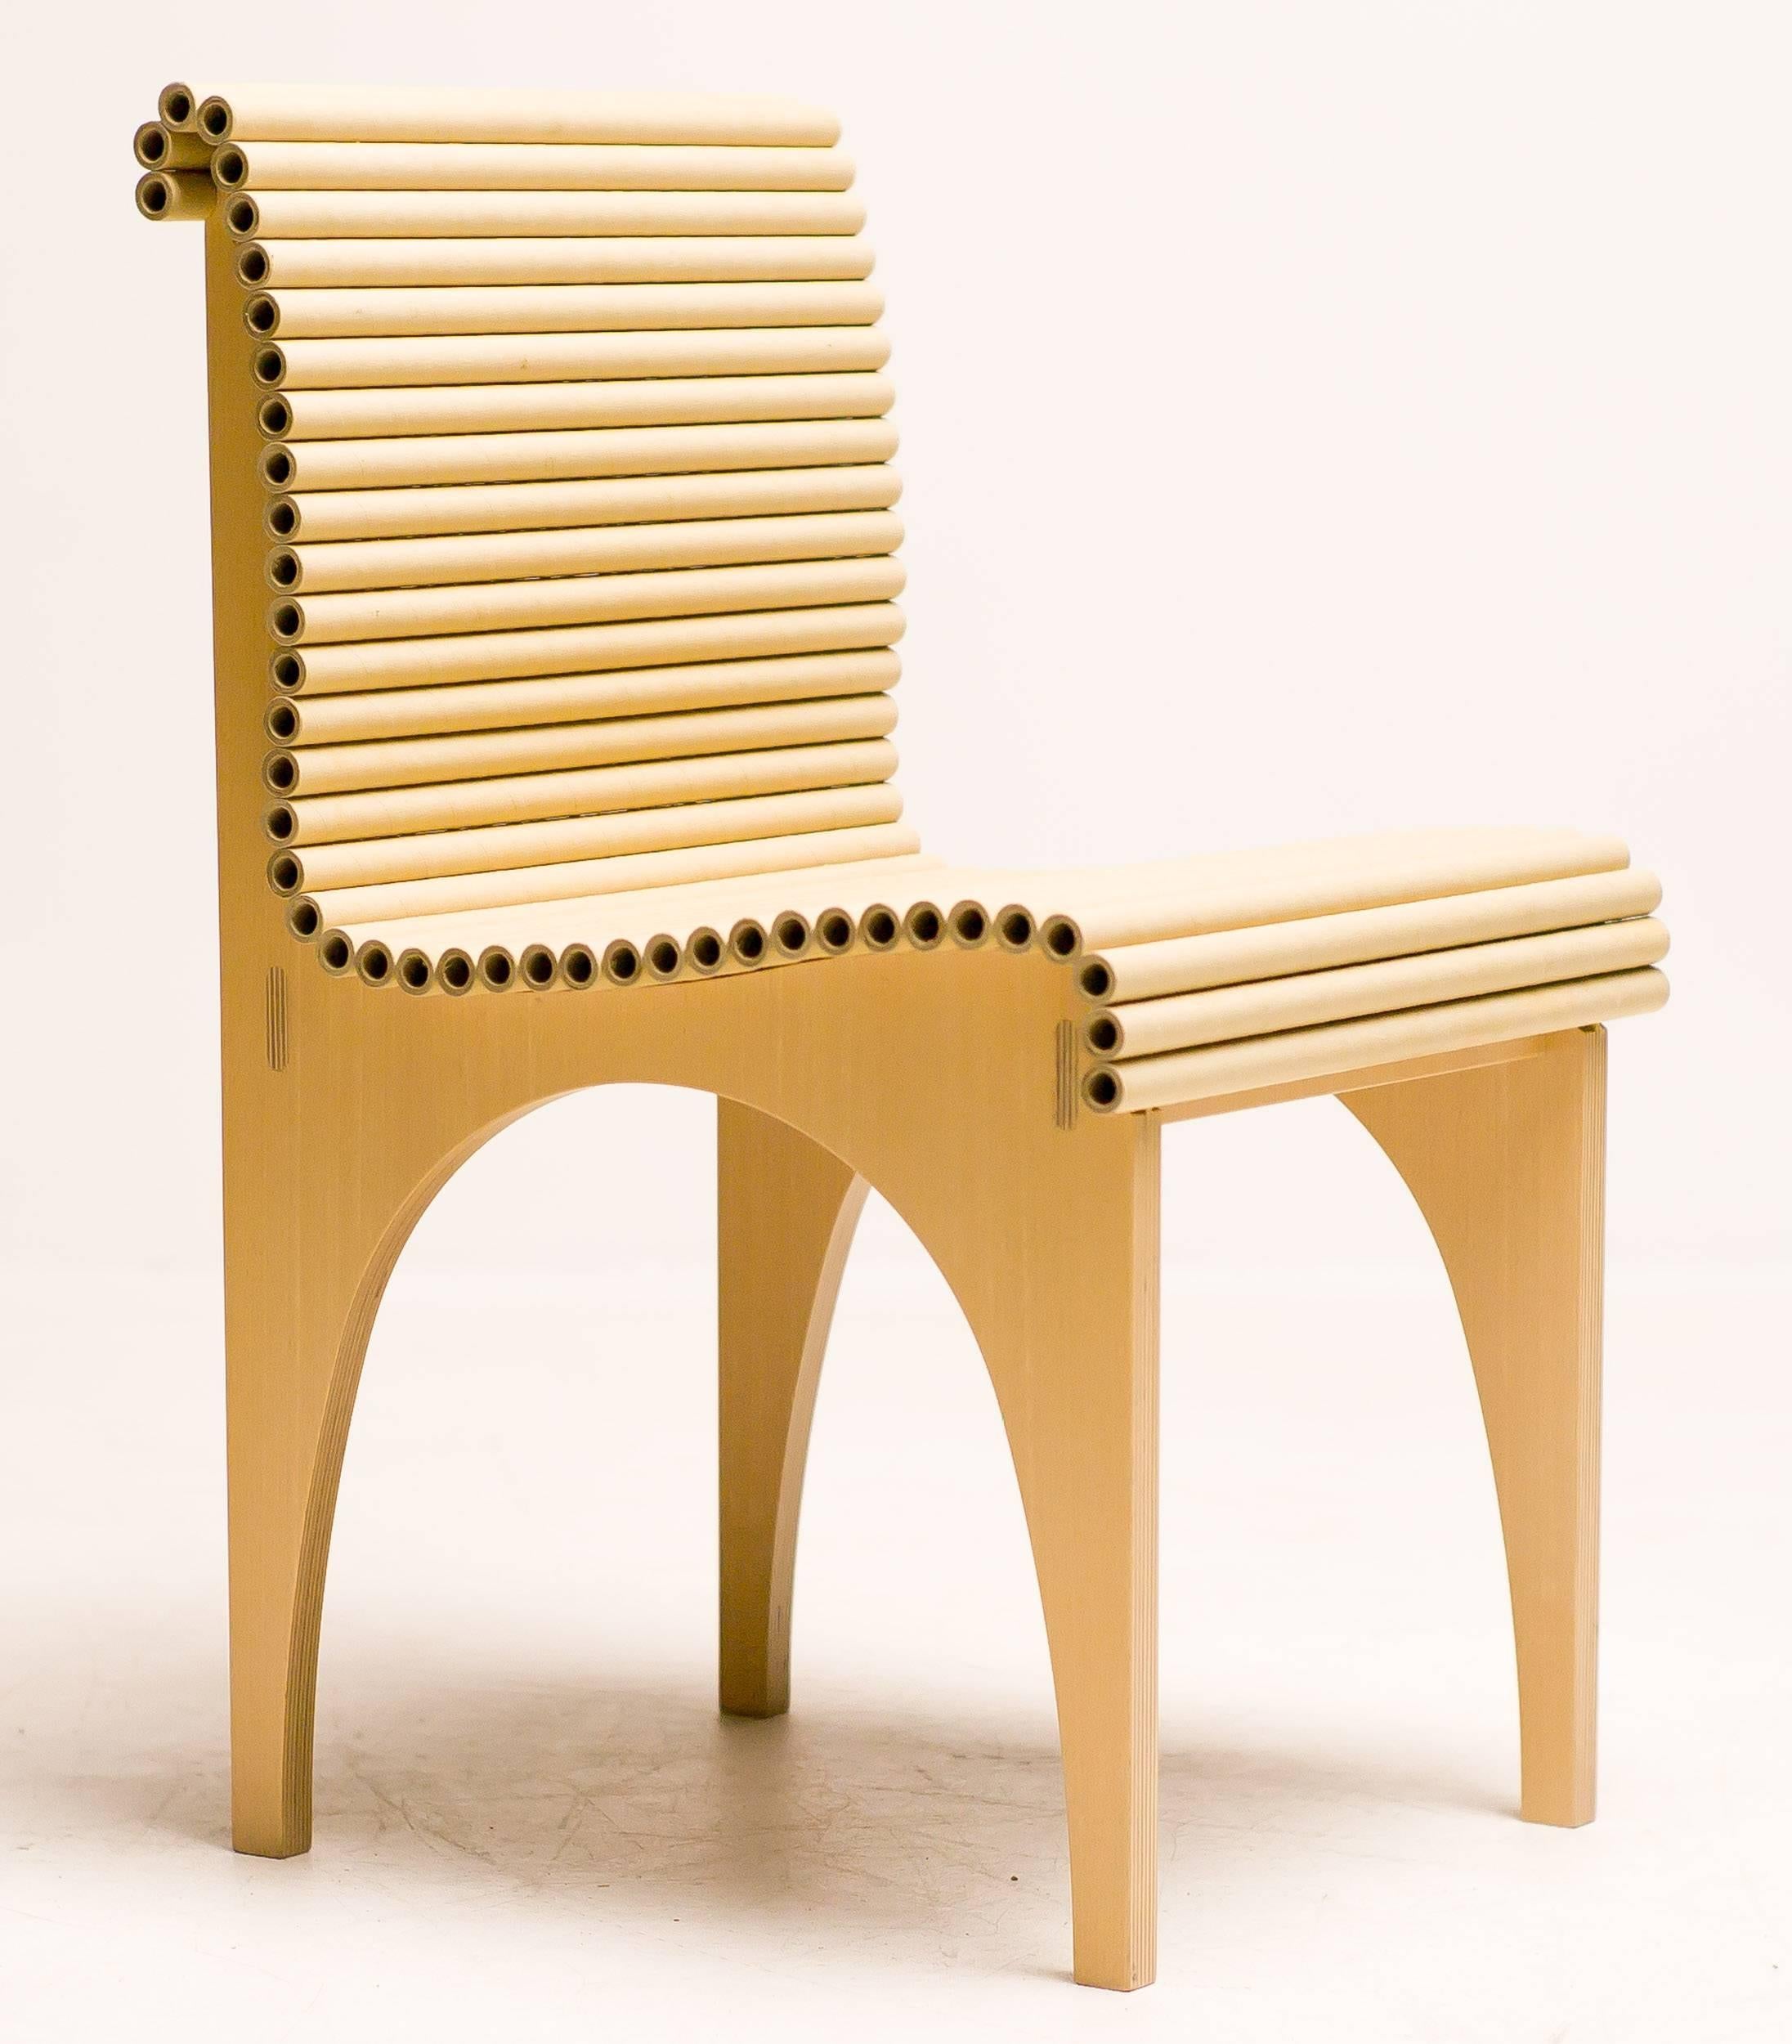 This elegant Carta chair was designed by Shigeru Ban for Cappellini in 1996. Defined by it's use of unconventional materials, the seating area of the chair is composed of recycled cardboard tubes, the chair presents characteristic Japanese design